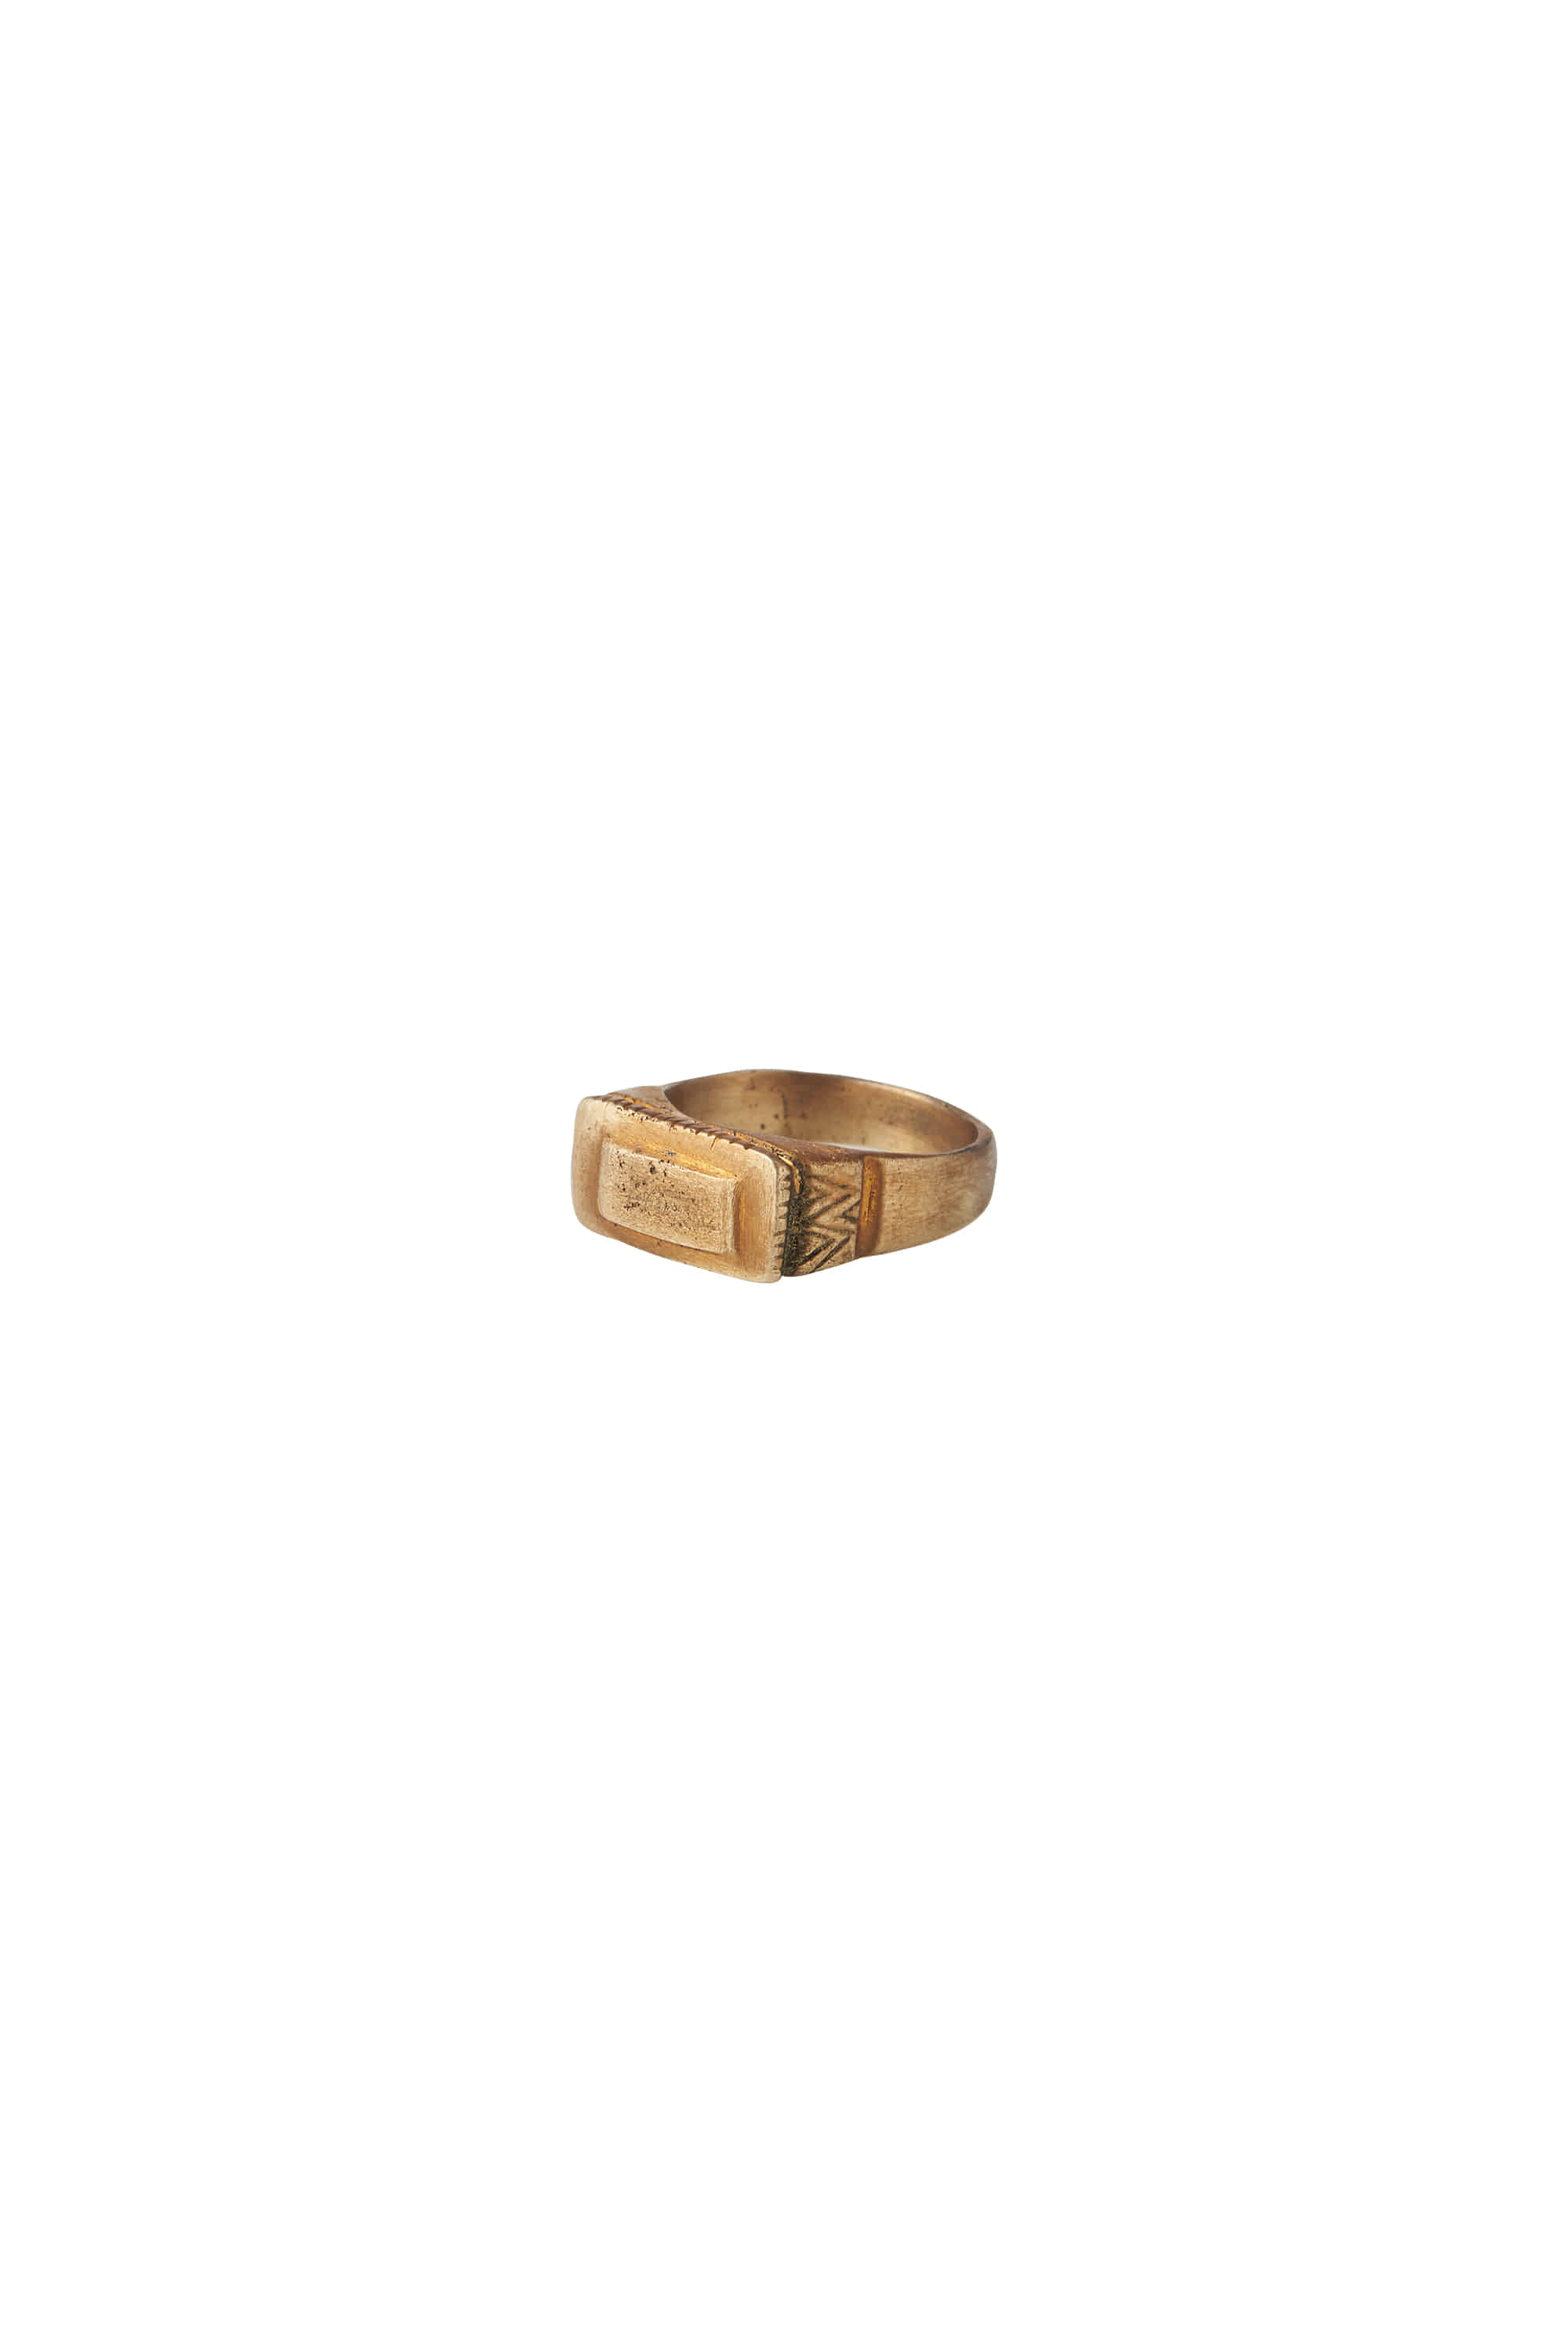 TEMPLE RING IN BRASS